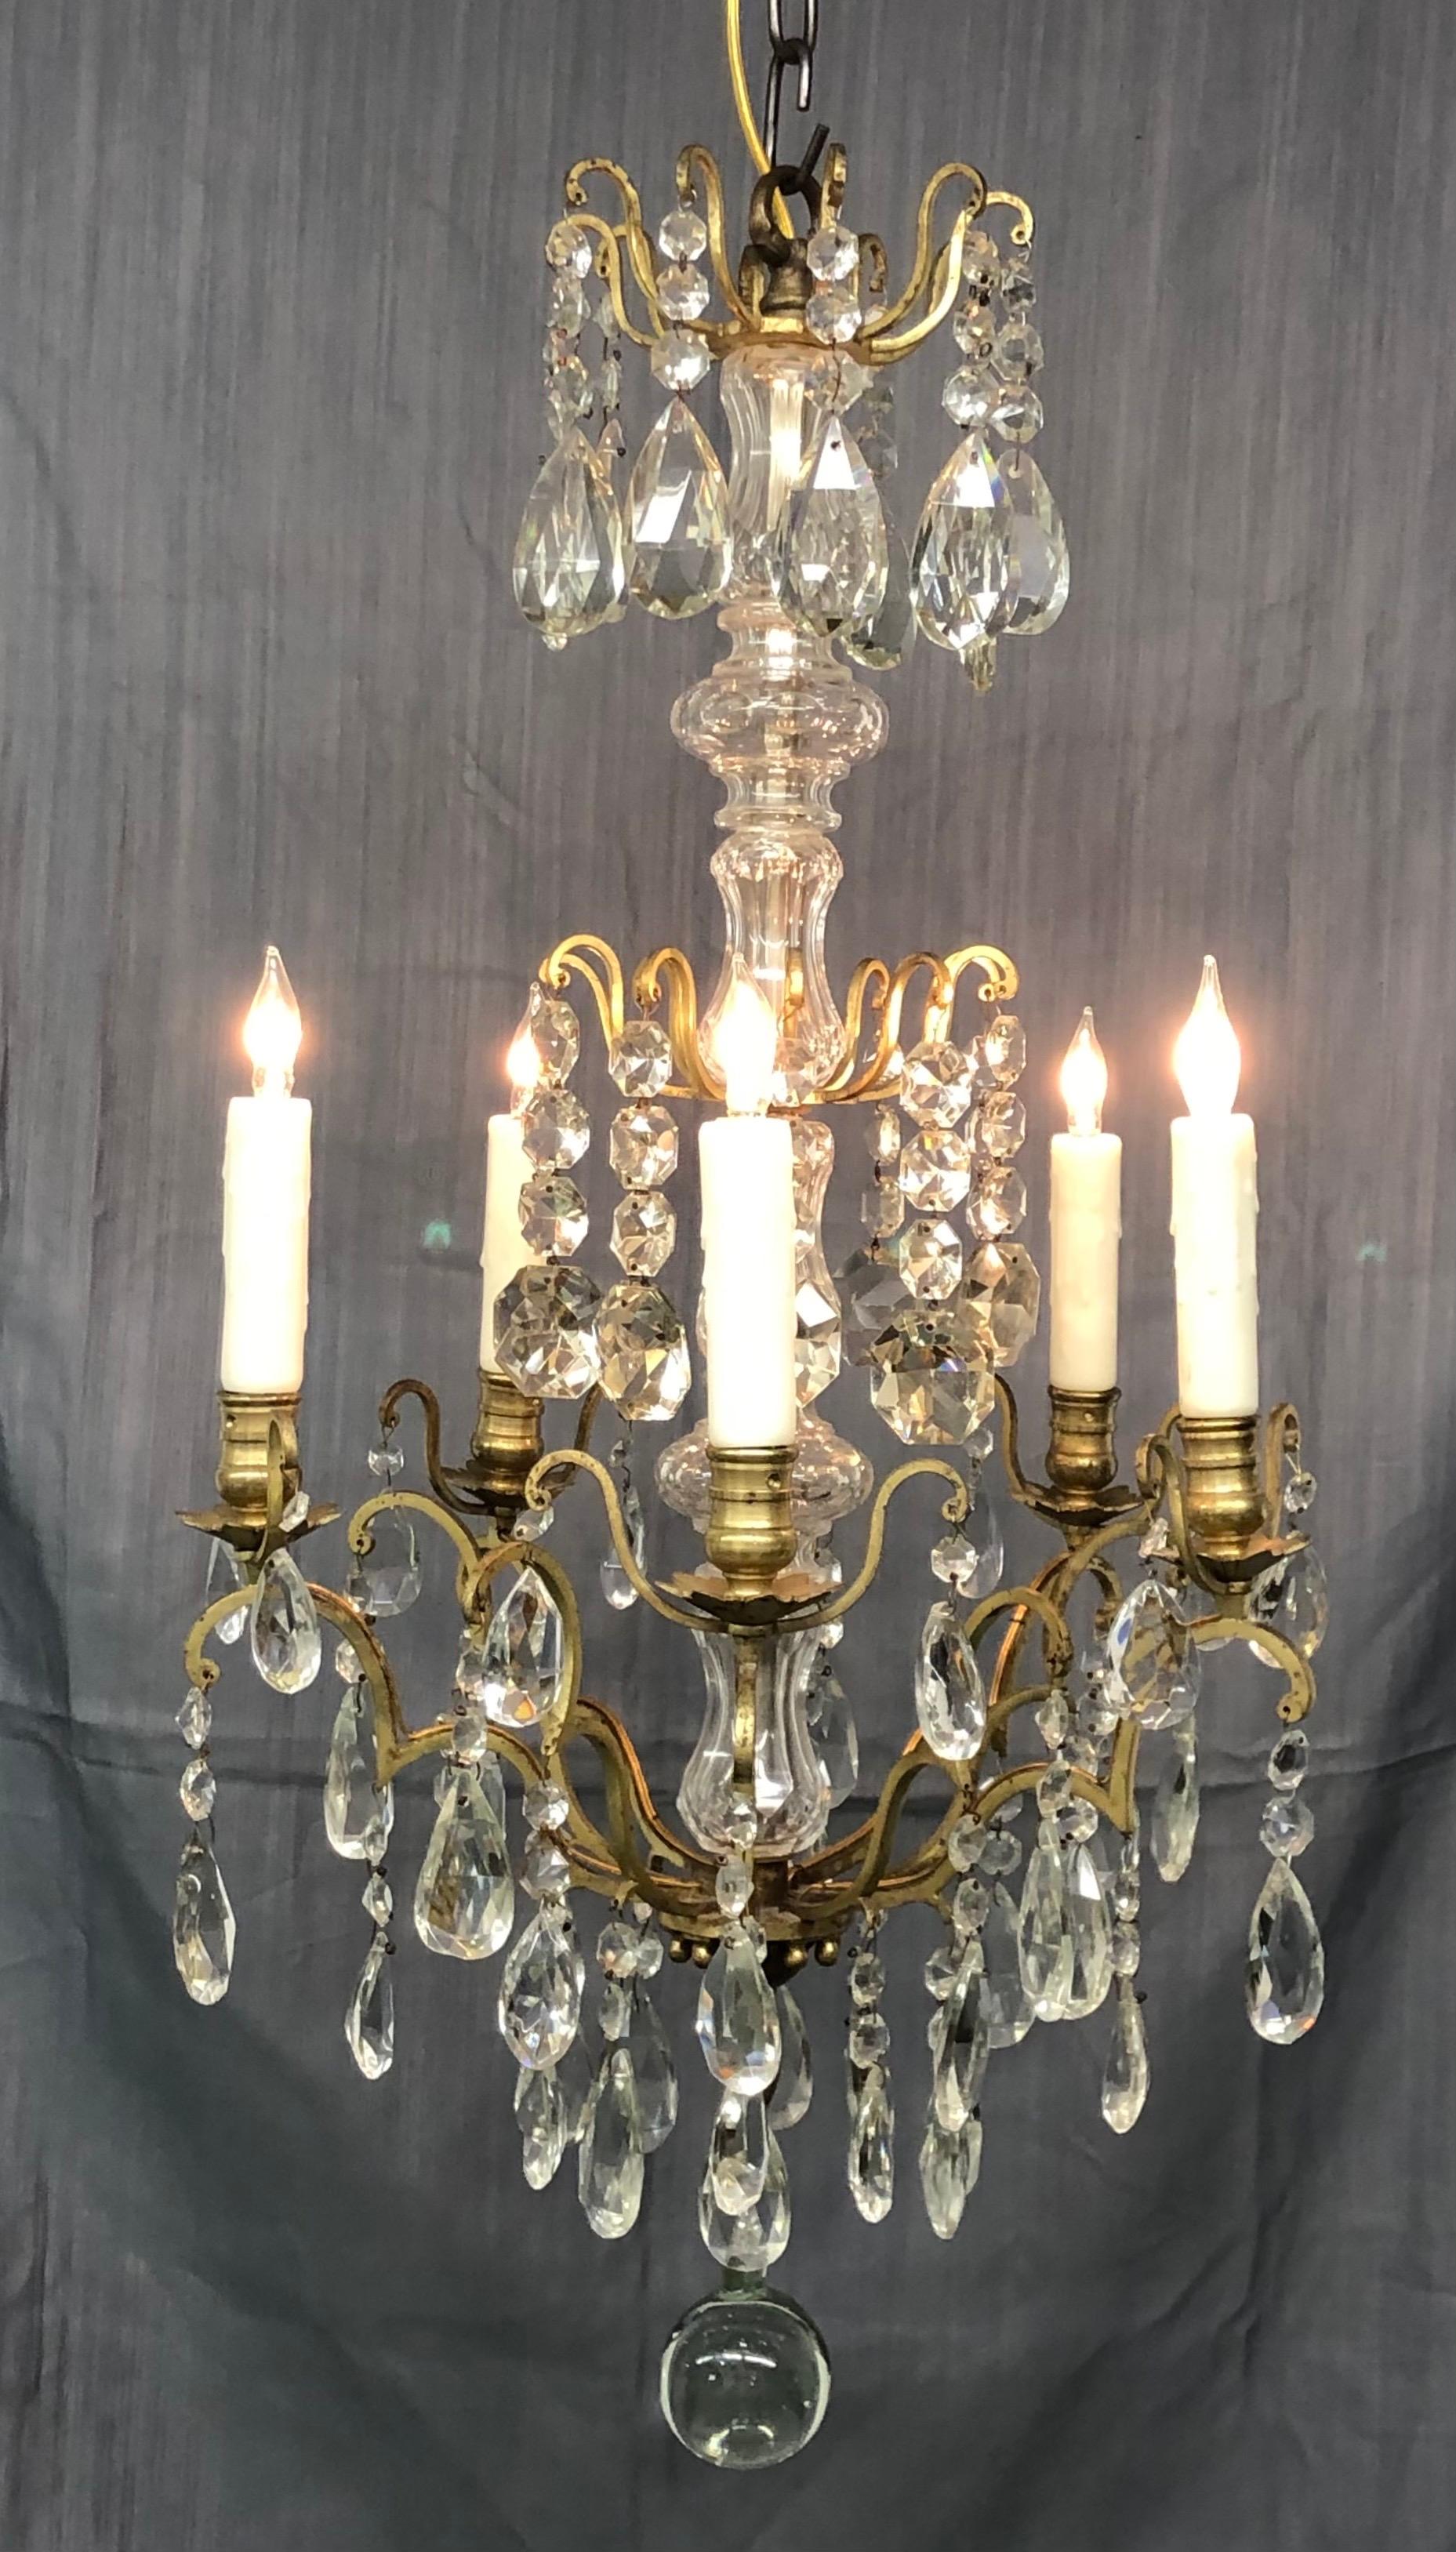 Elegant French Louis XVI style gilt bronze and cut crystal five-arm chandelier of Baccarat quality with faceted cut crystal prisms, chains and faceted cut crystal shaft.